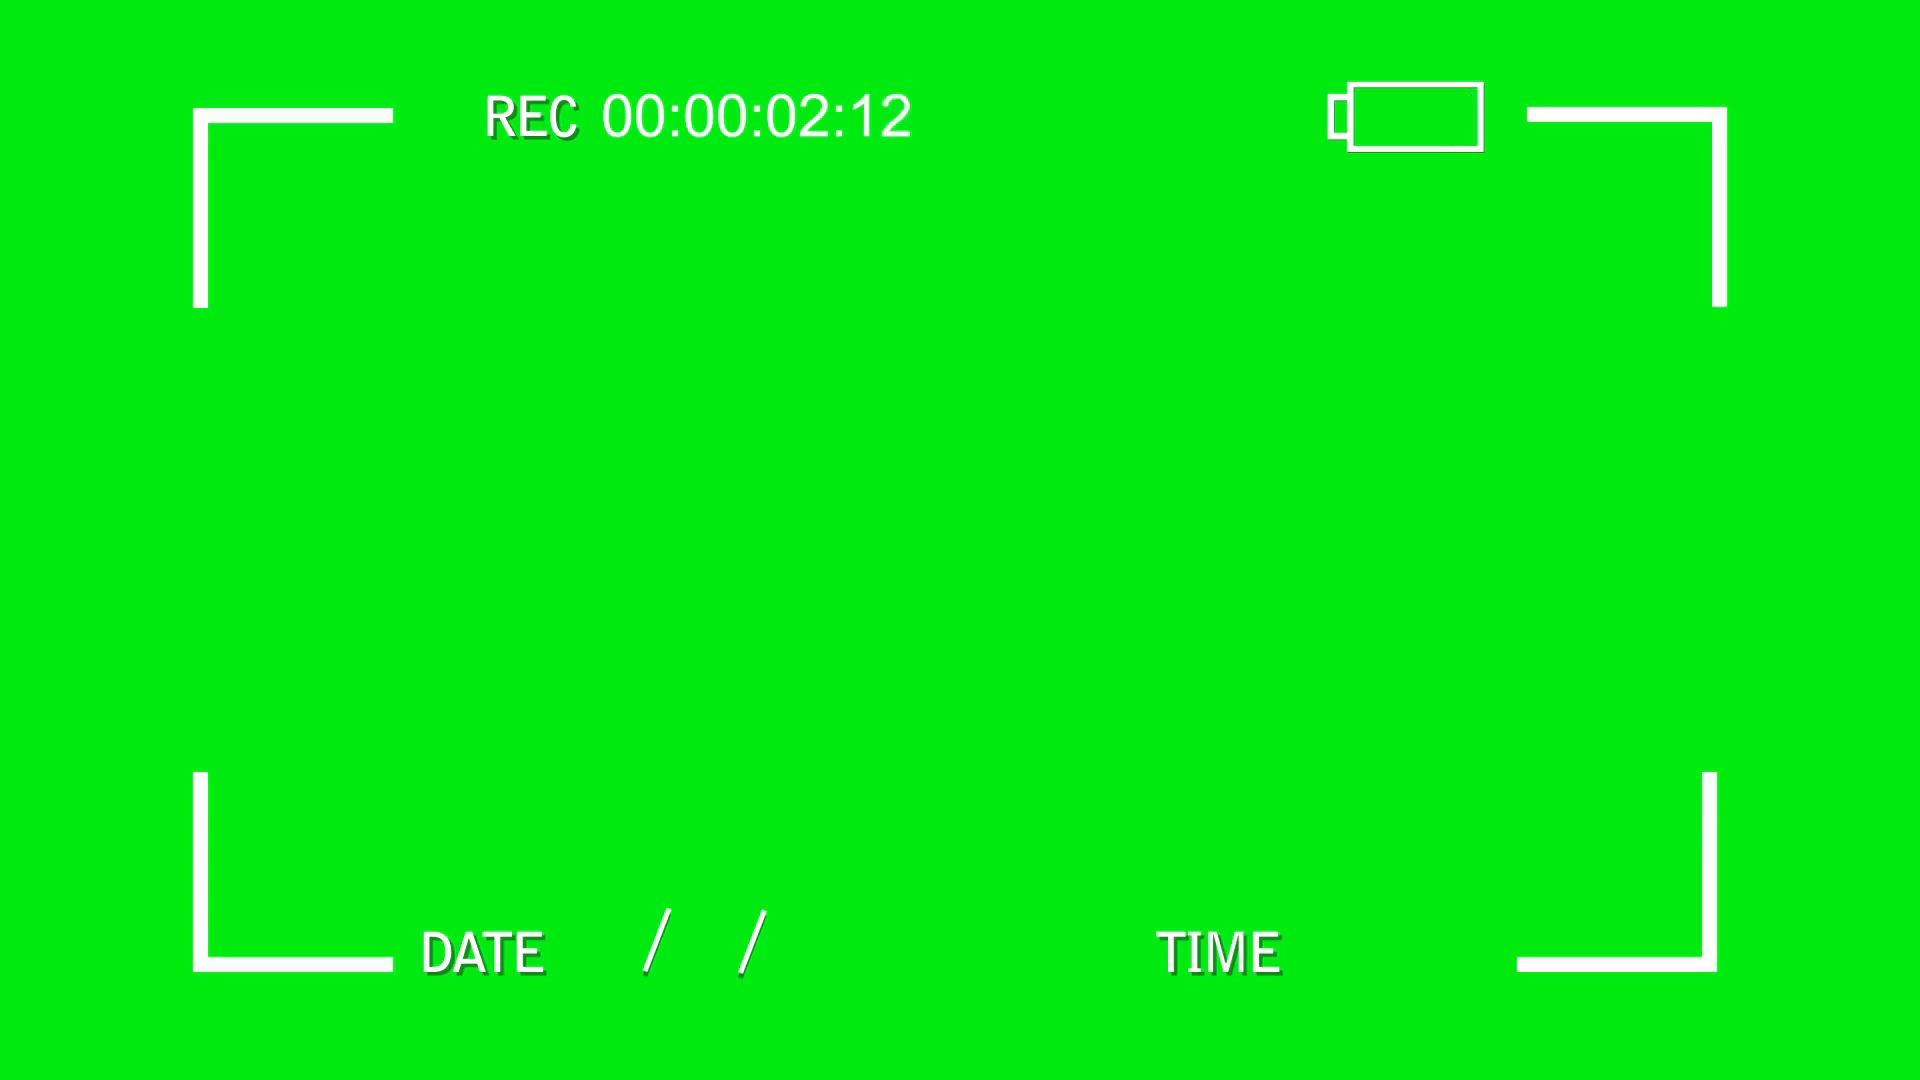 Simple Video Camera Display View on a Green Screen Background Motion